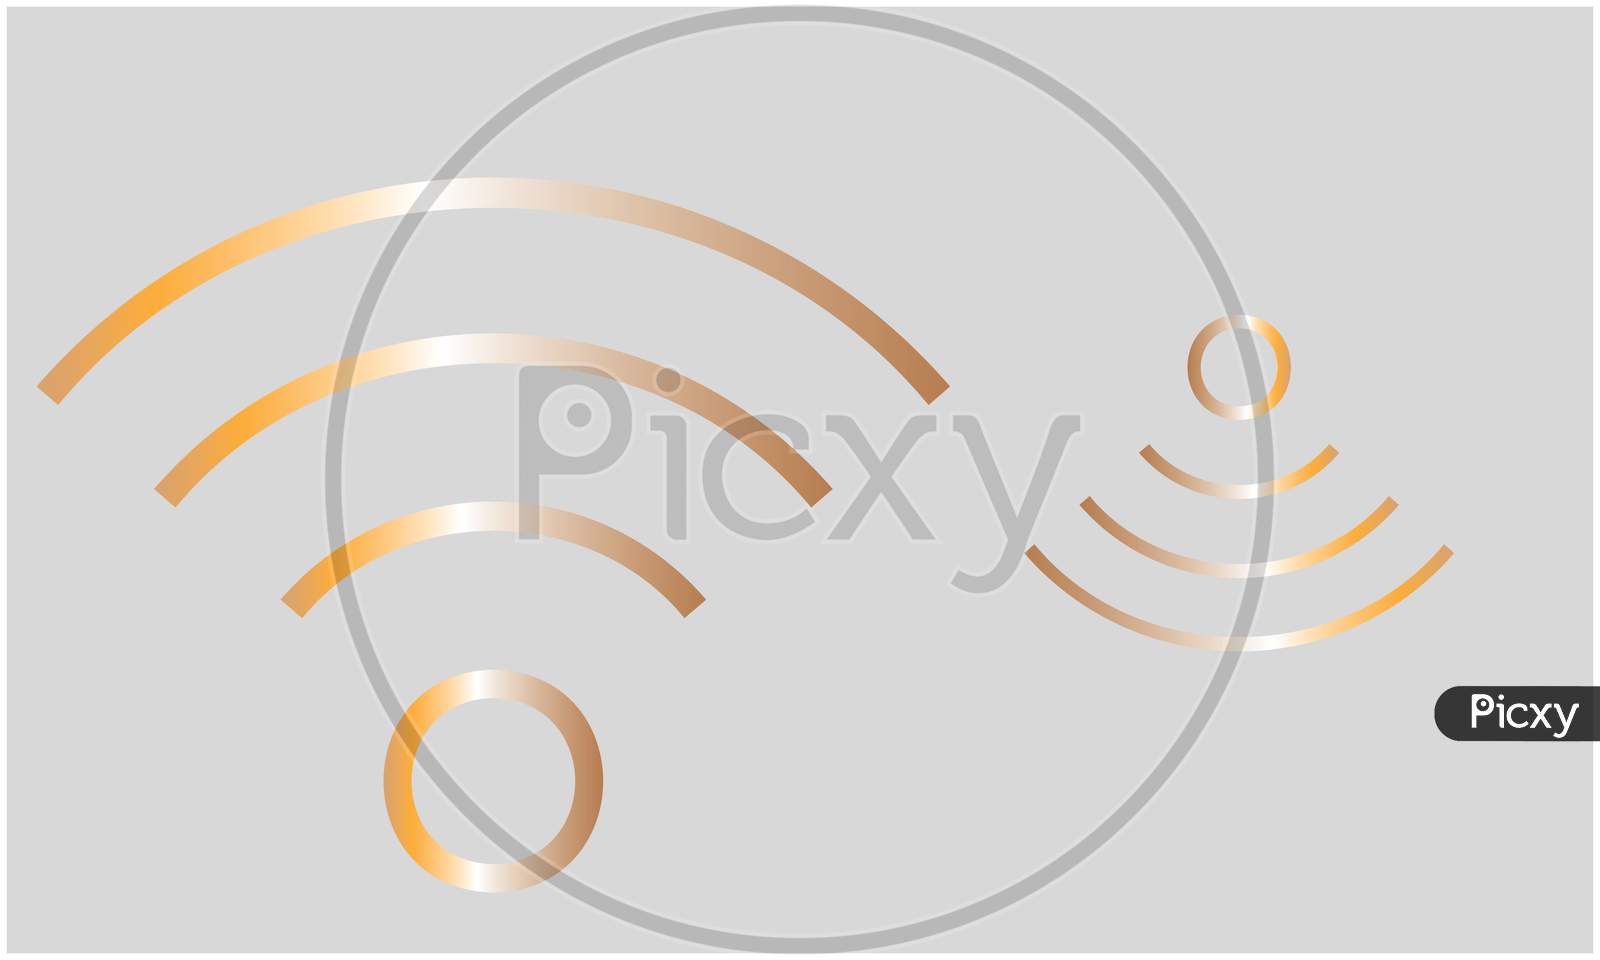 Abstract Golden Wireless Symbol On A Background